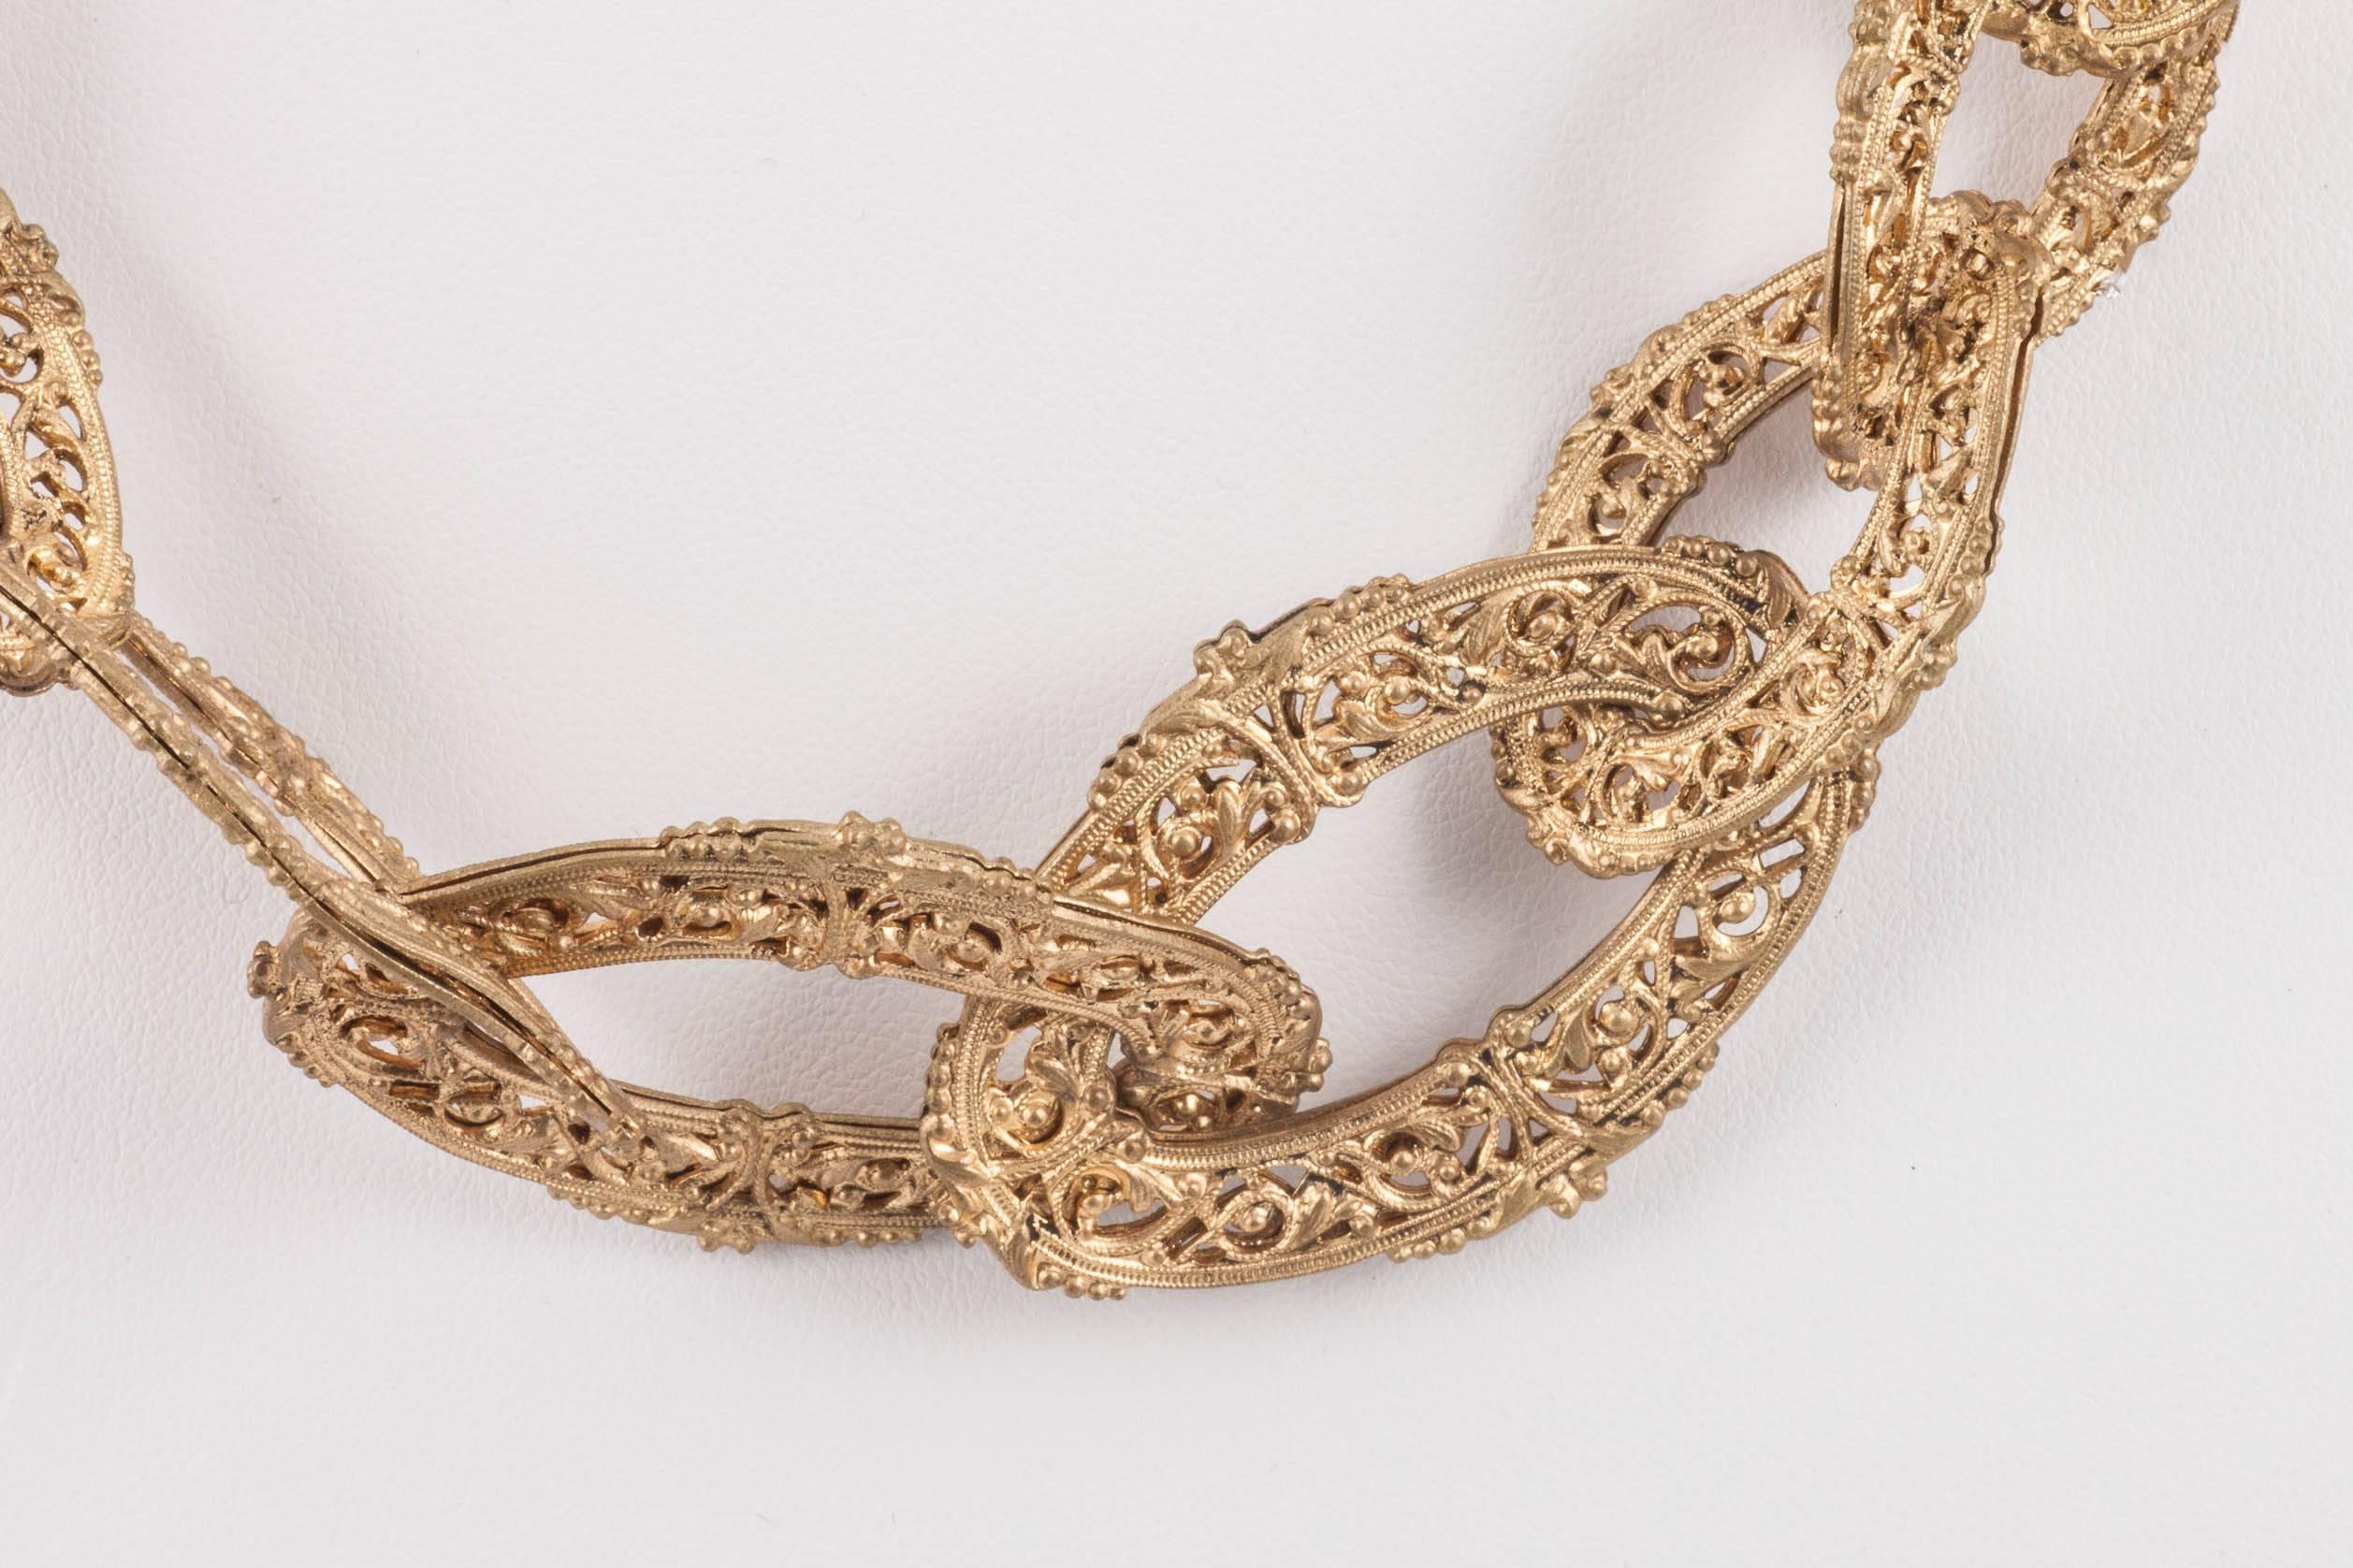 A rare and very decorative 'chain' necklace, very collectable, from Chanel in the early 1960s, made in the Byzantine style, from delicate filigree metal links, that create a graduated necklace. A very iconic style, and simply marked in the old way,